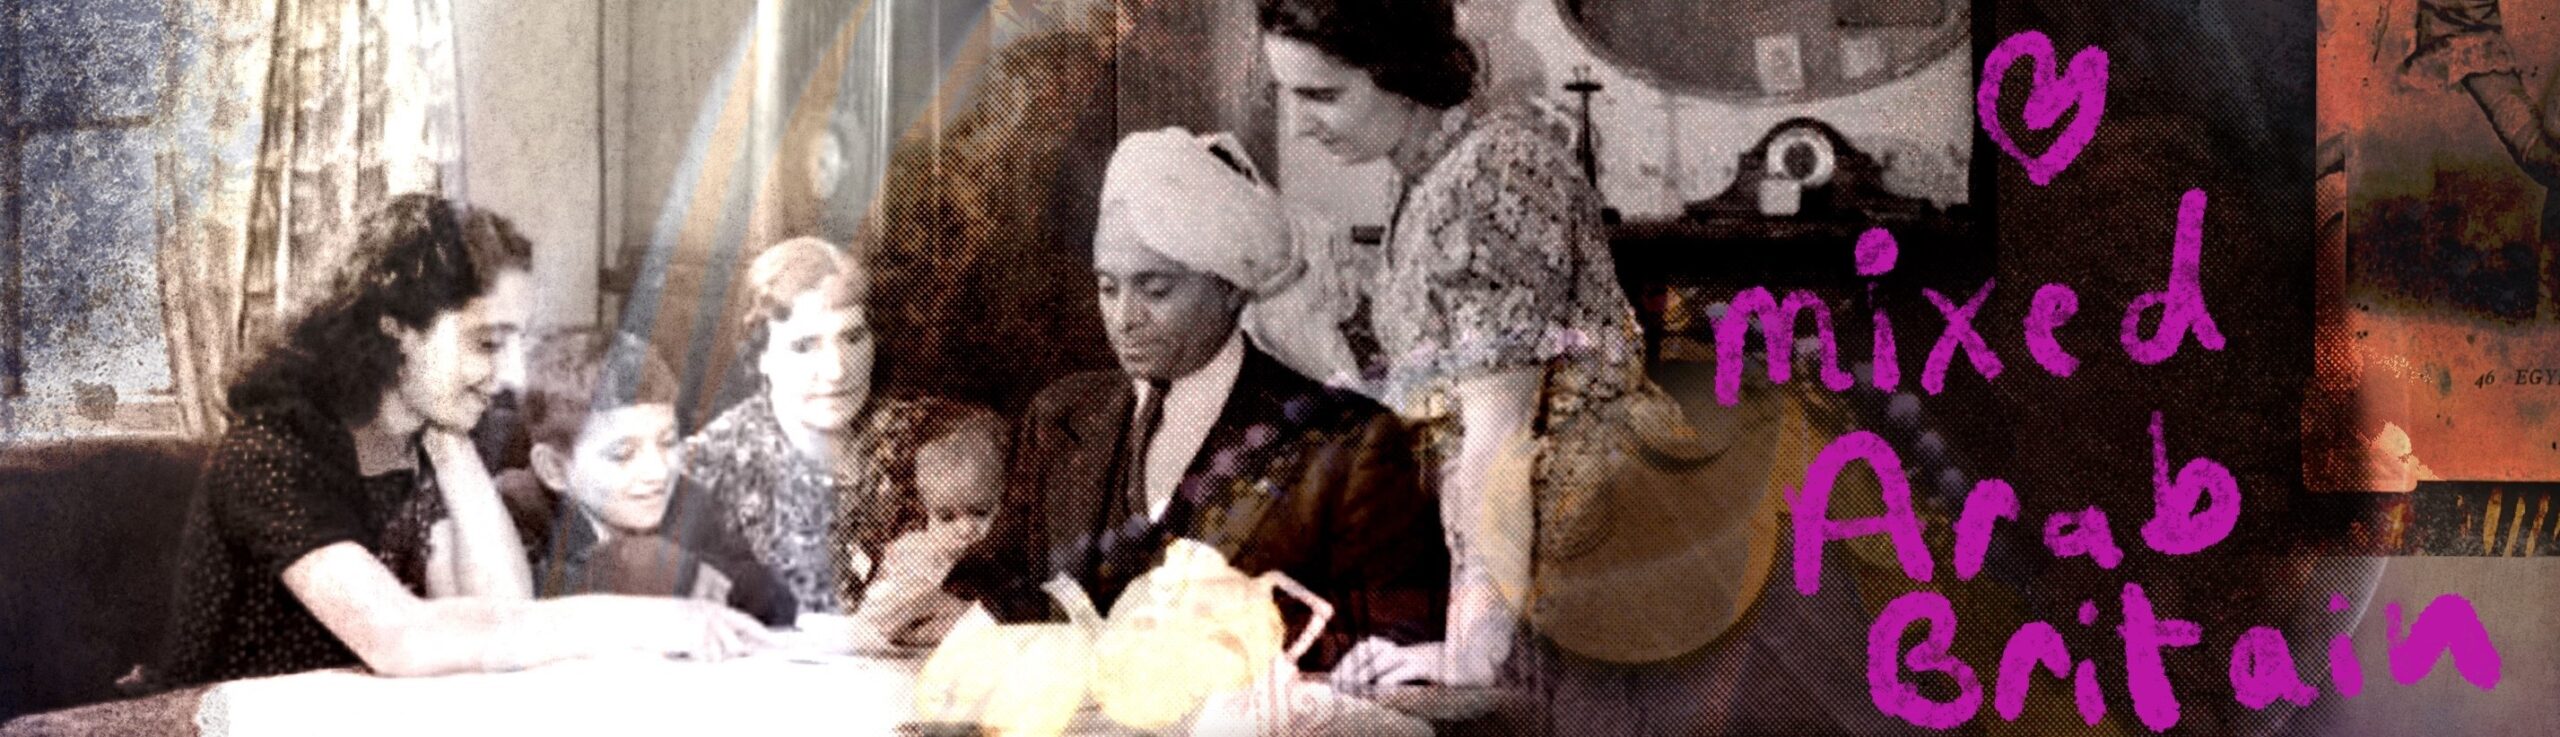 Banner showing an old photograph of a mixed race family sitting around a tea table in a typically mid-20th century English home.. The man is wearing a turban. Overlaid are the words mixed Arab Britain.